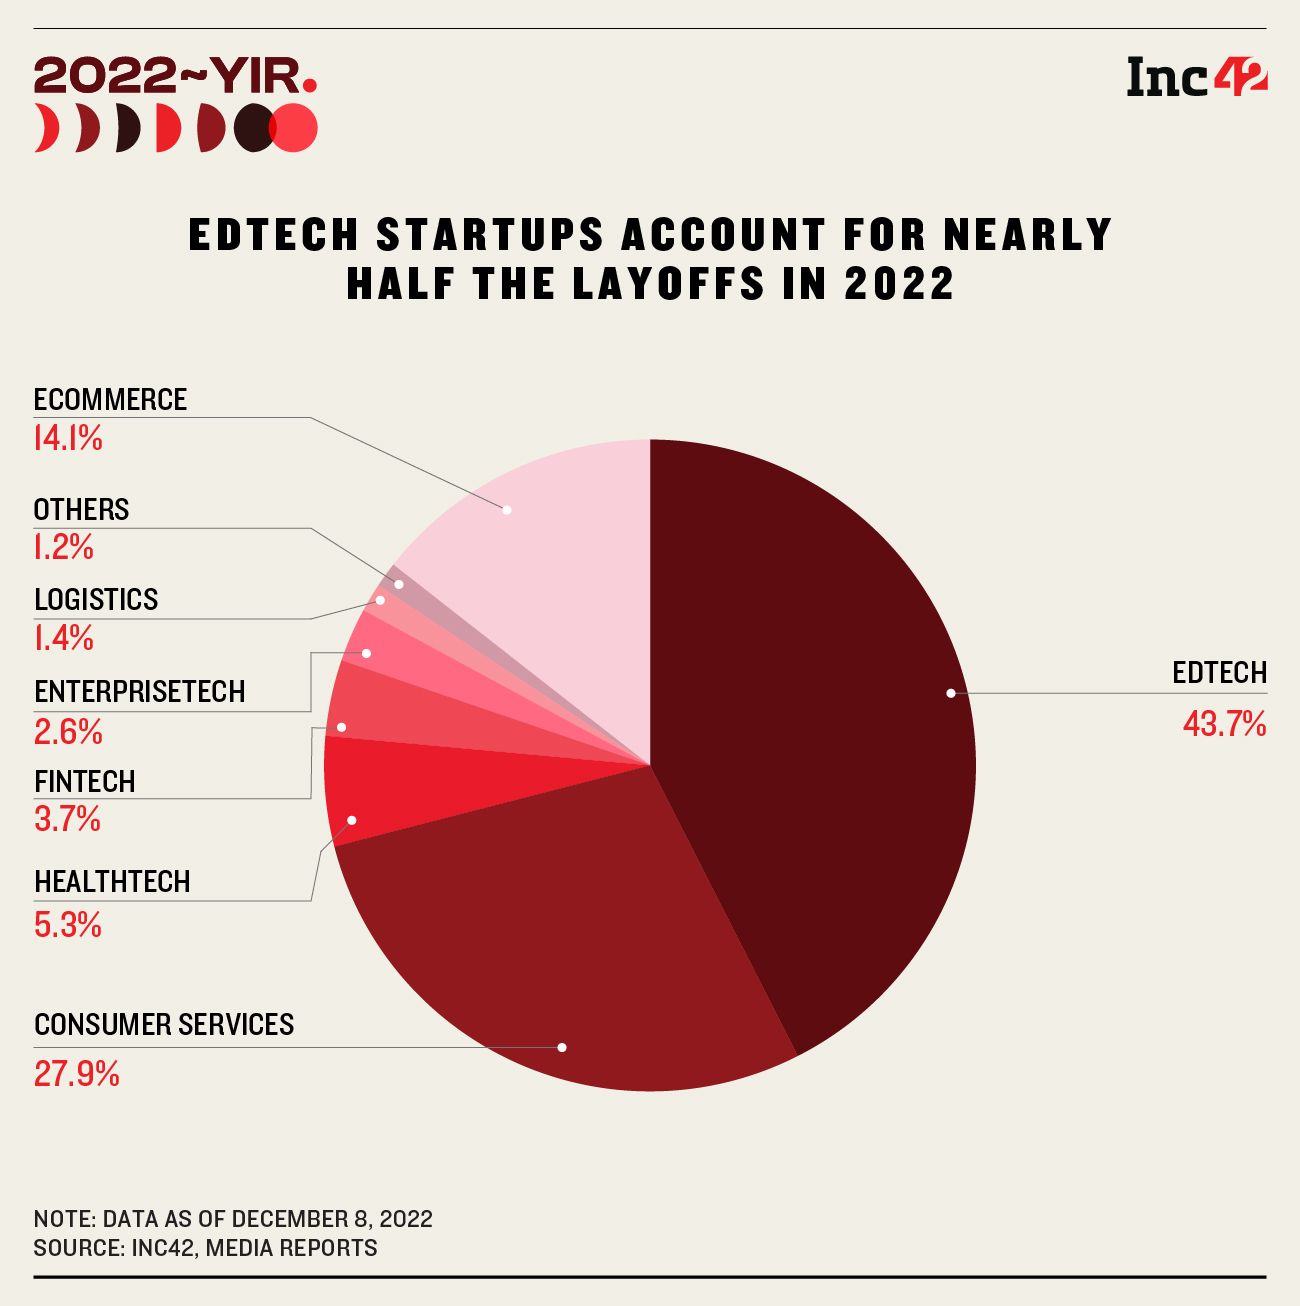 Edtech, Consumer Services and Ecommerce saw the most firings in 2022